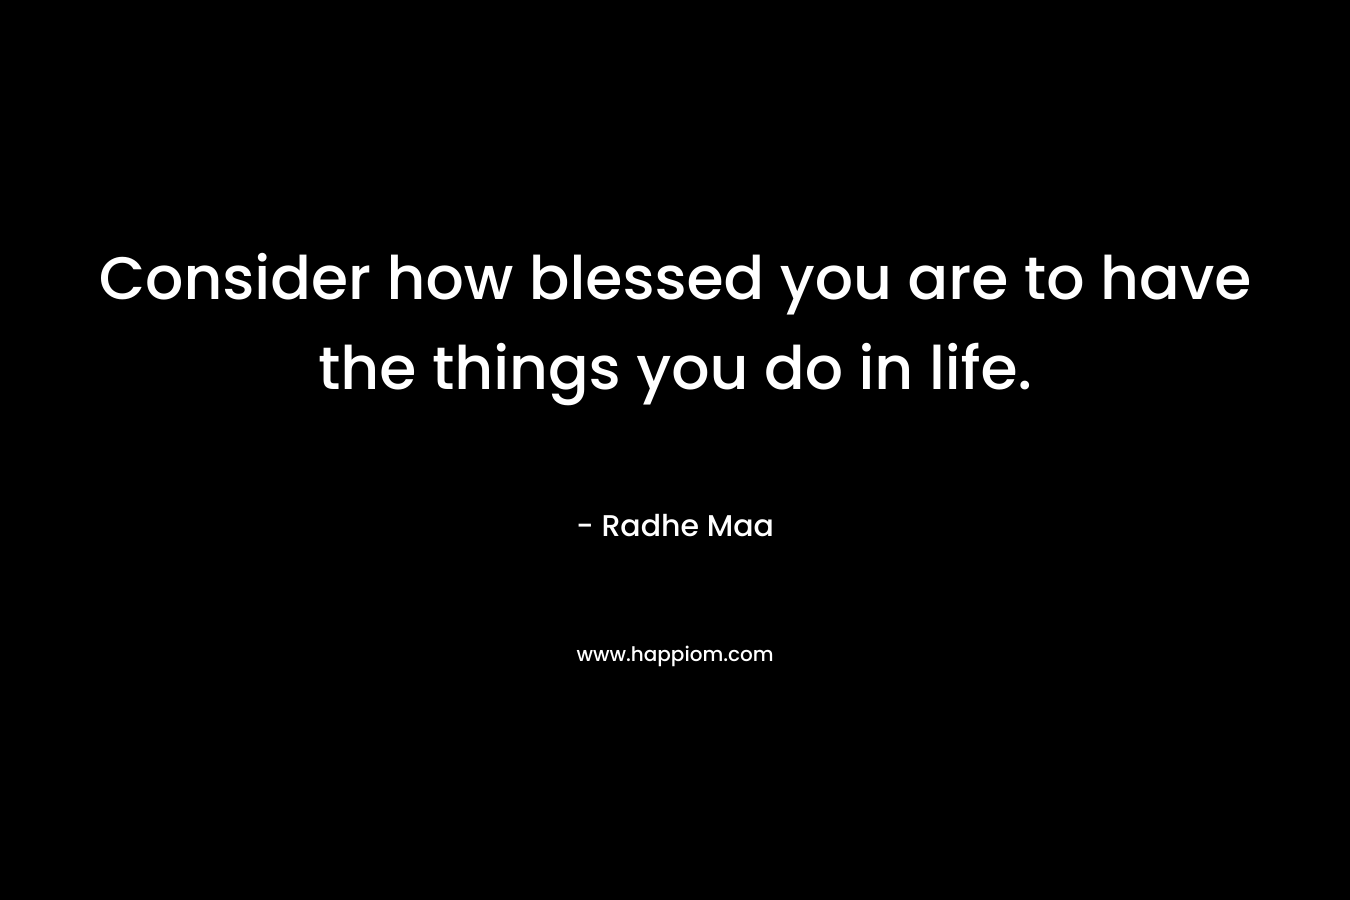 Consider how blessed you are to have the things you do in life.